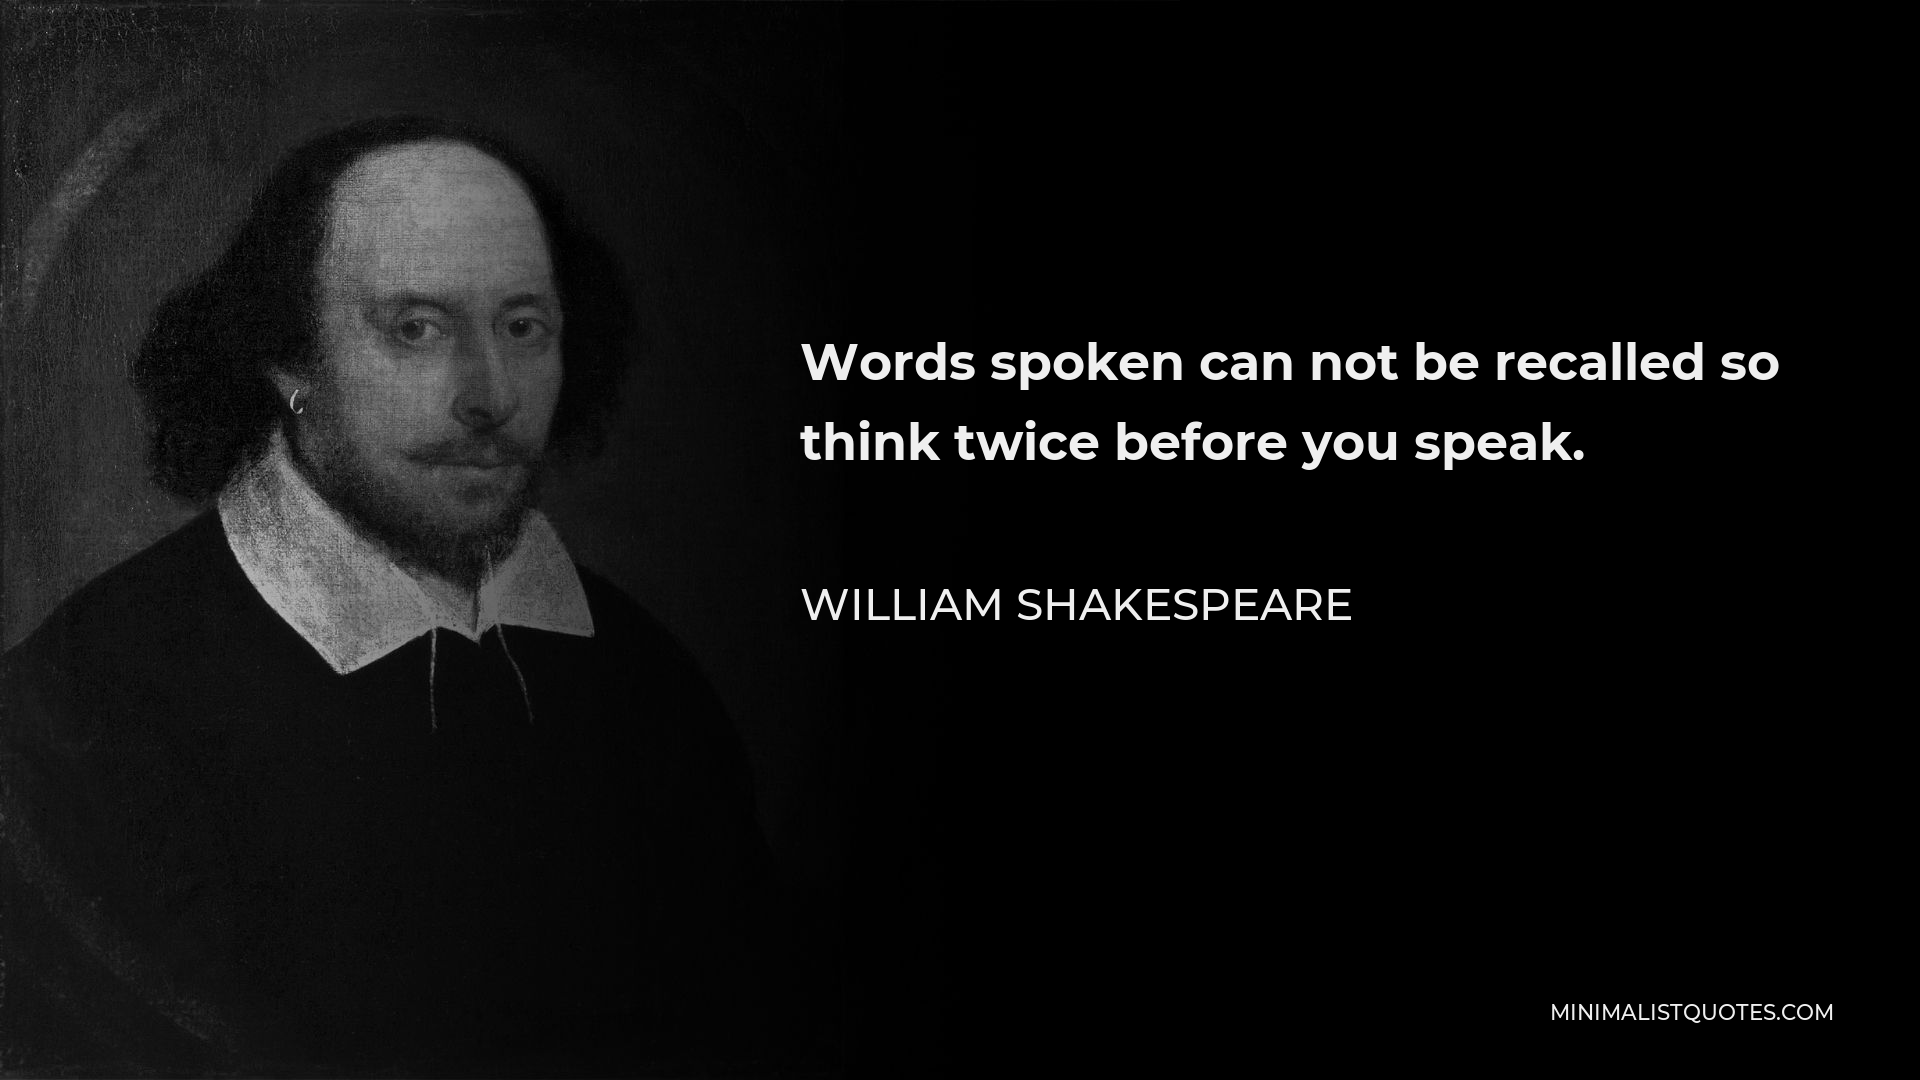 William Shakespeare Quote - Words spoken can not be recalled so think twice before you speak.